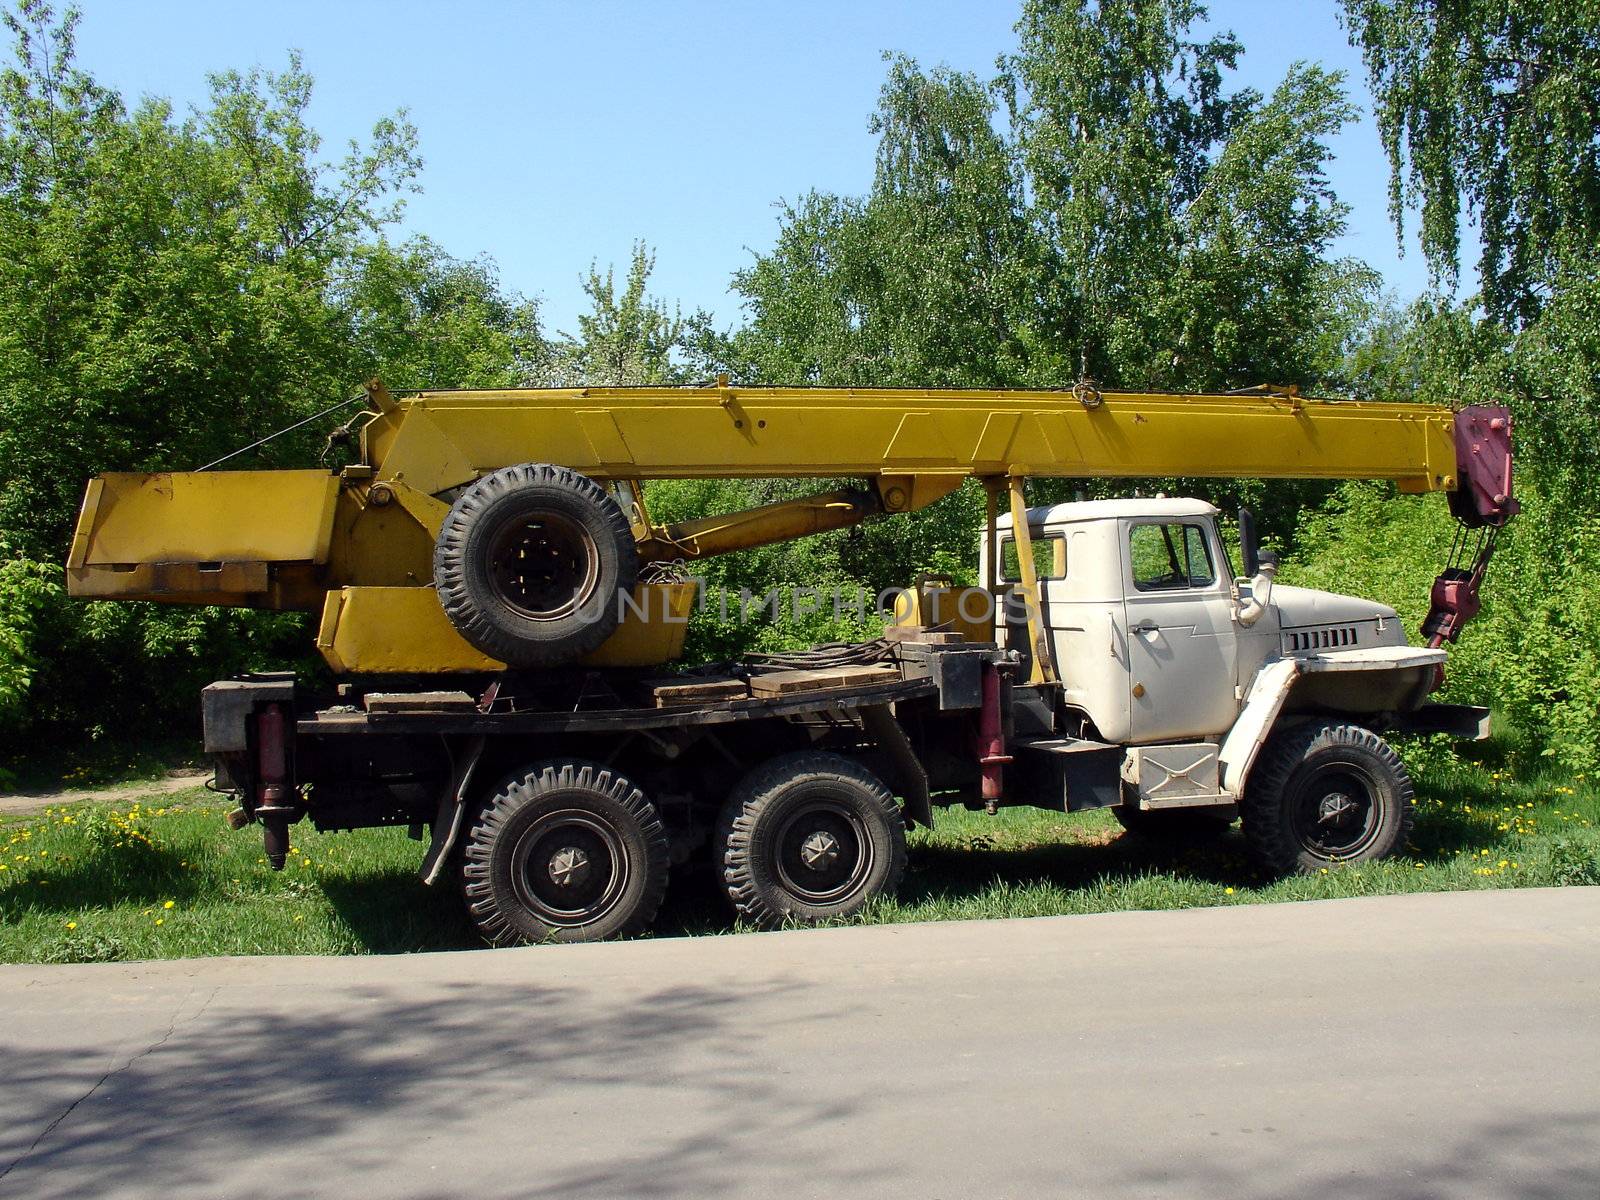 Truck with yellow crane at the grebe field near road